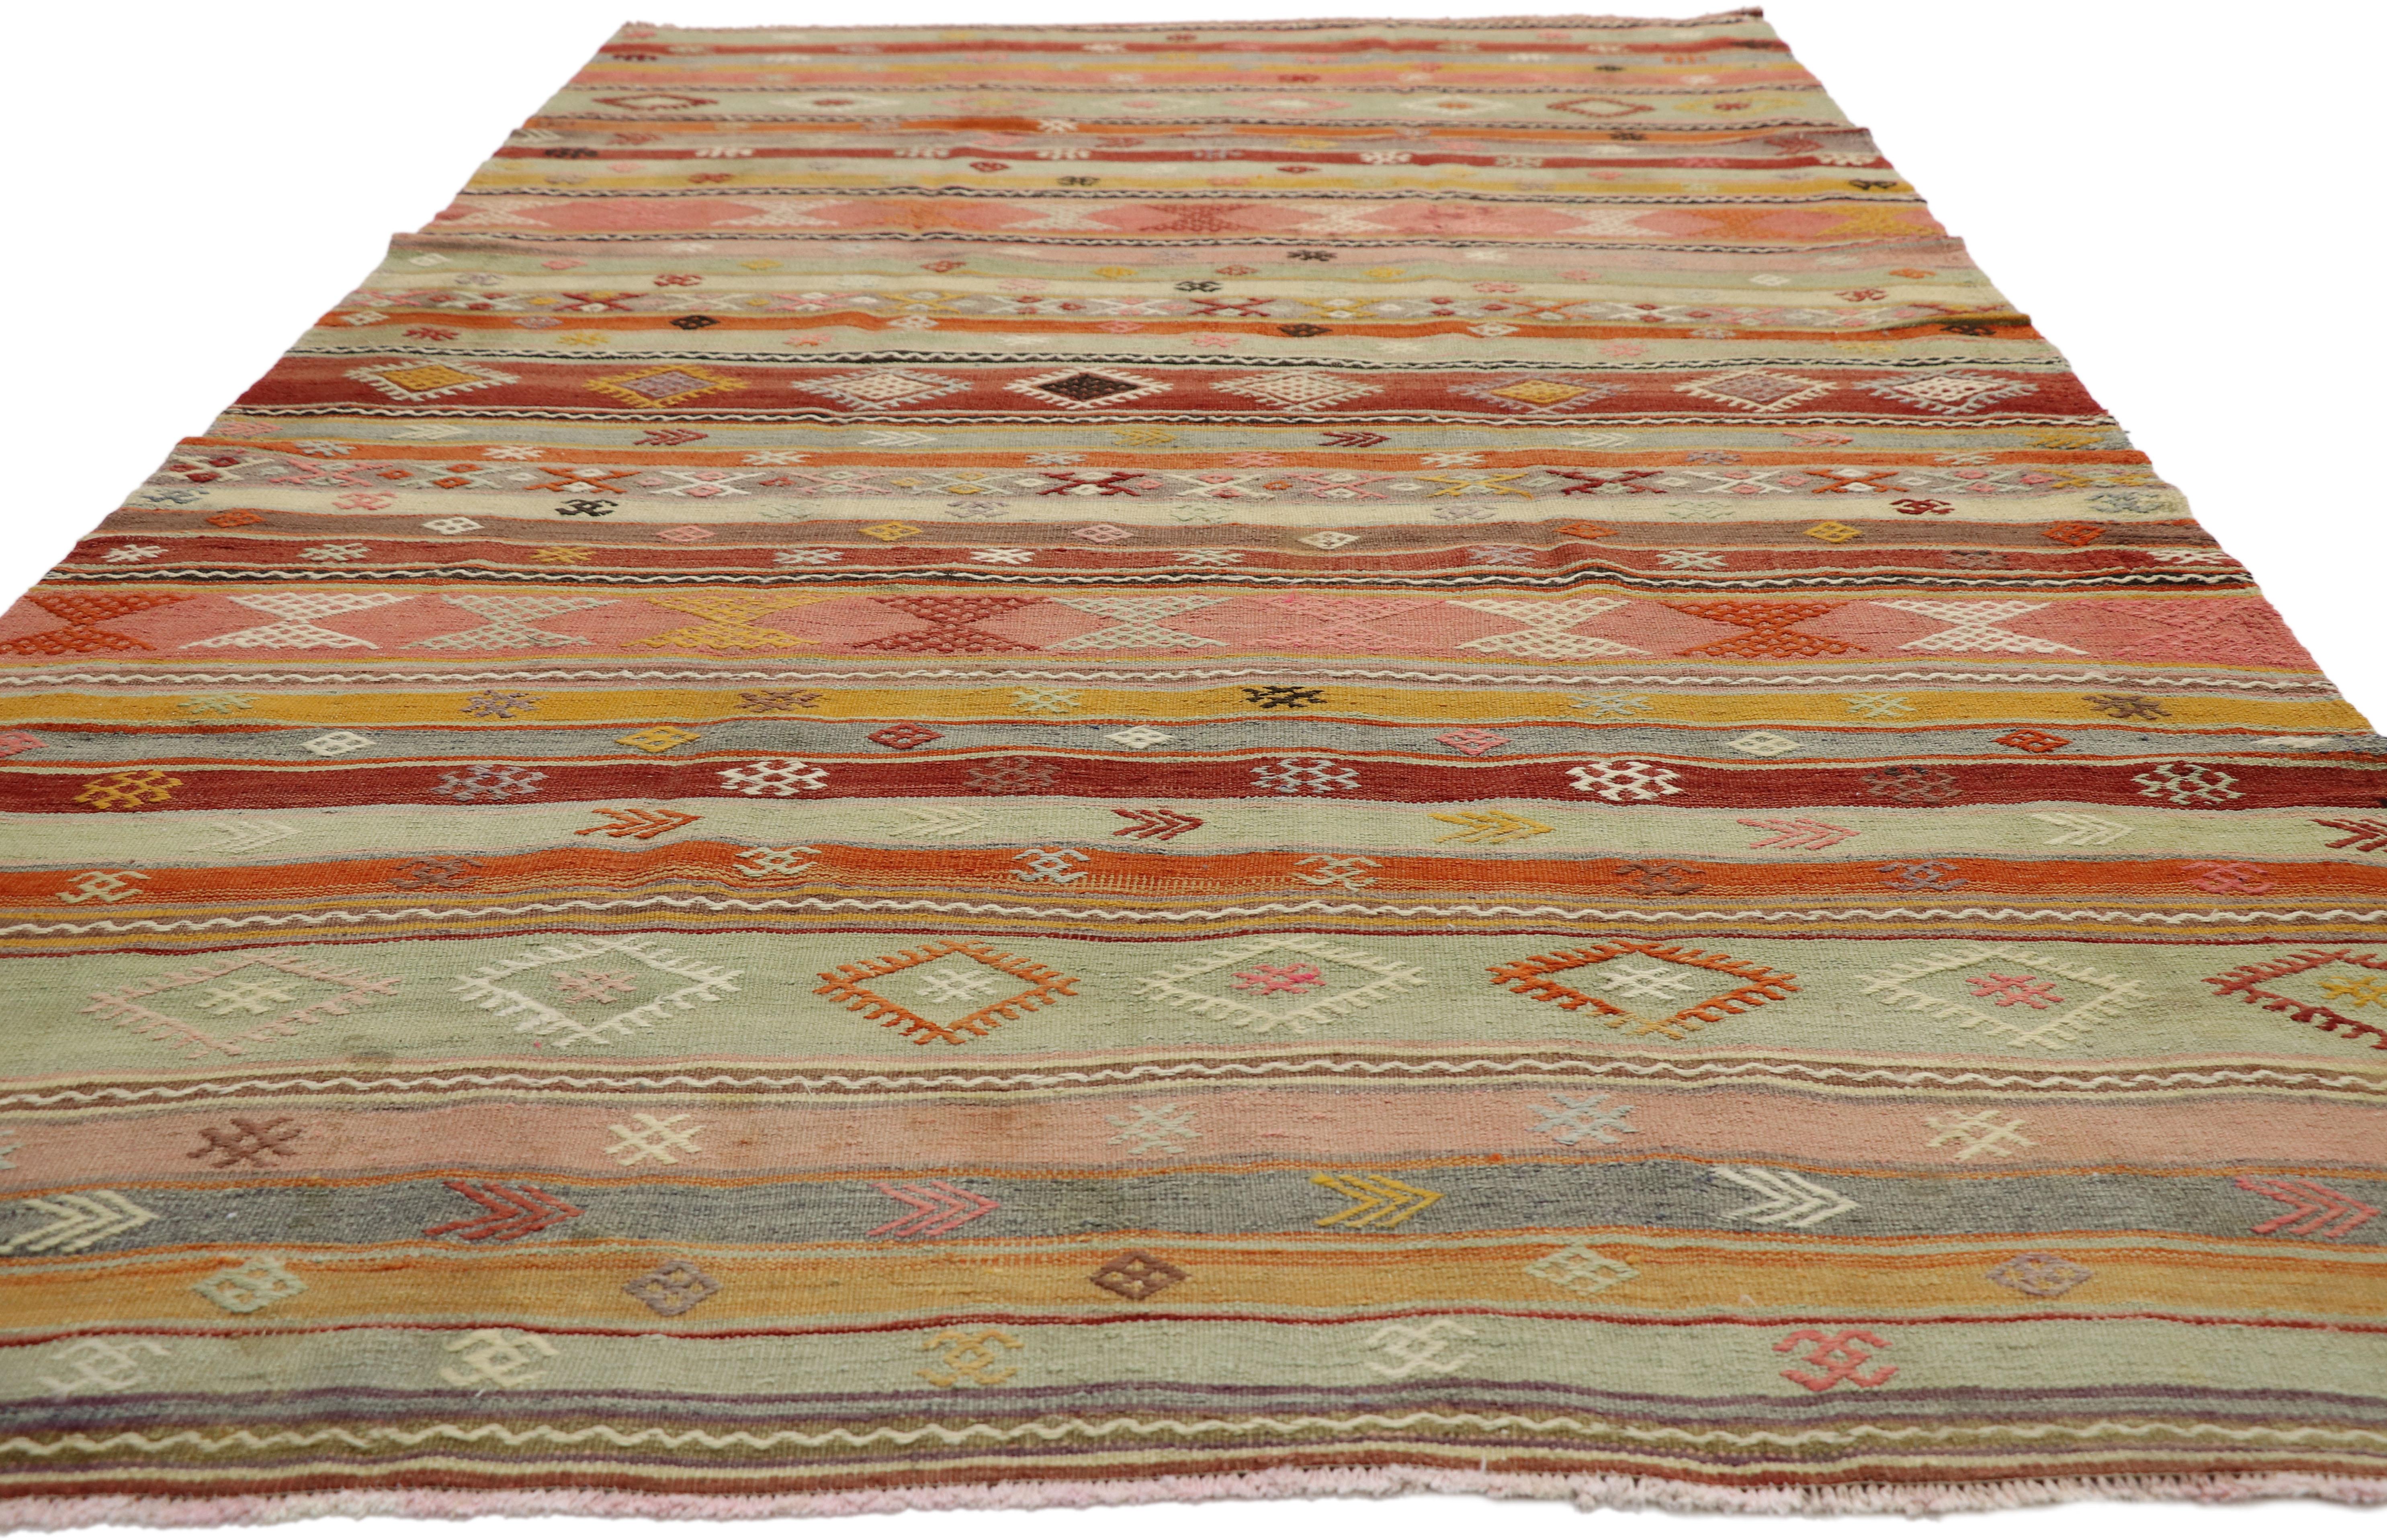 Hand-Woven Vintage Turkish Striped Kilim Rug with Bohemian Tribal Style, Flat-Weave Rug